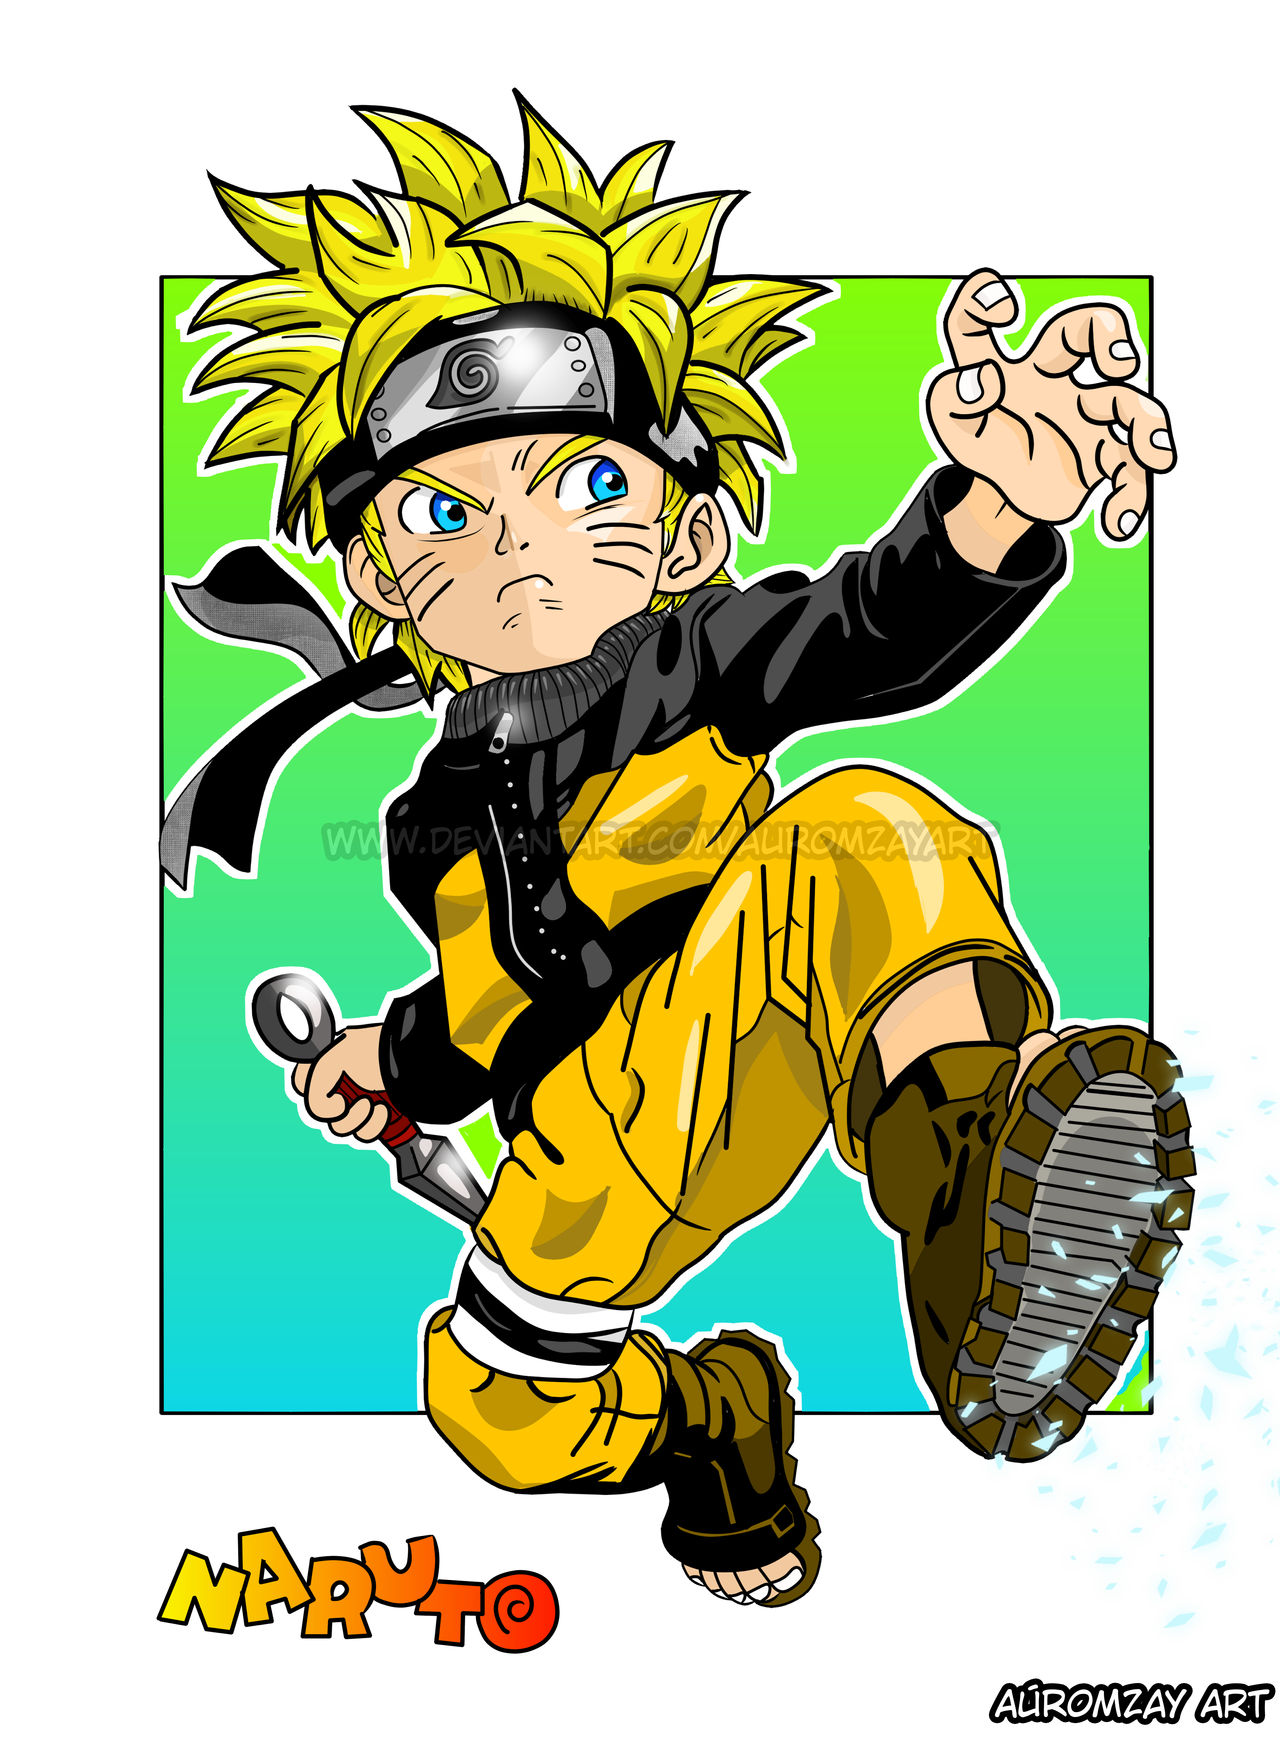 Drawing Naruto in Dragon Ball Z style by Shight on DeviantArt